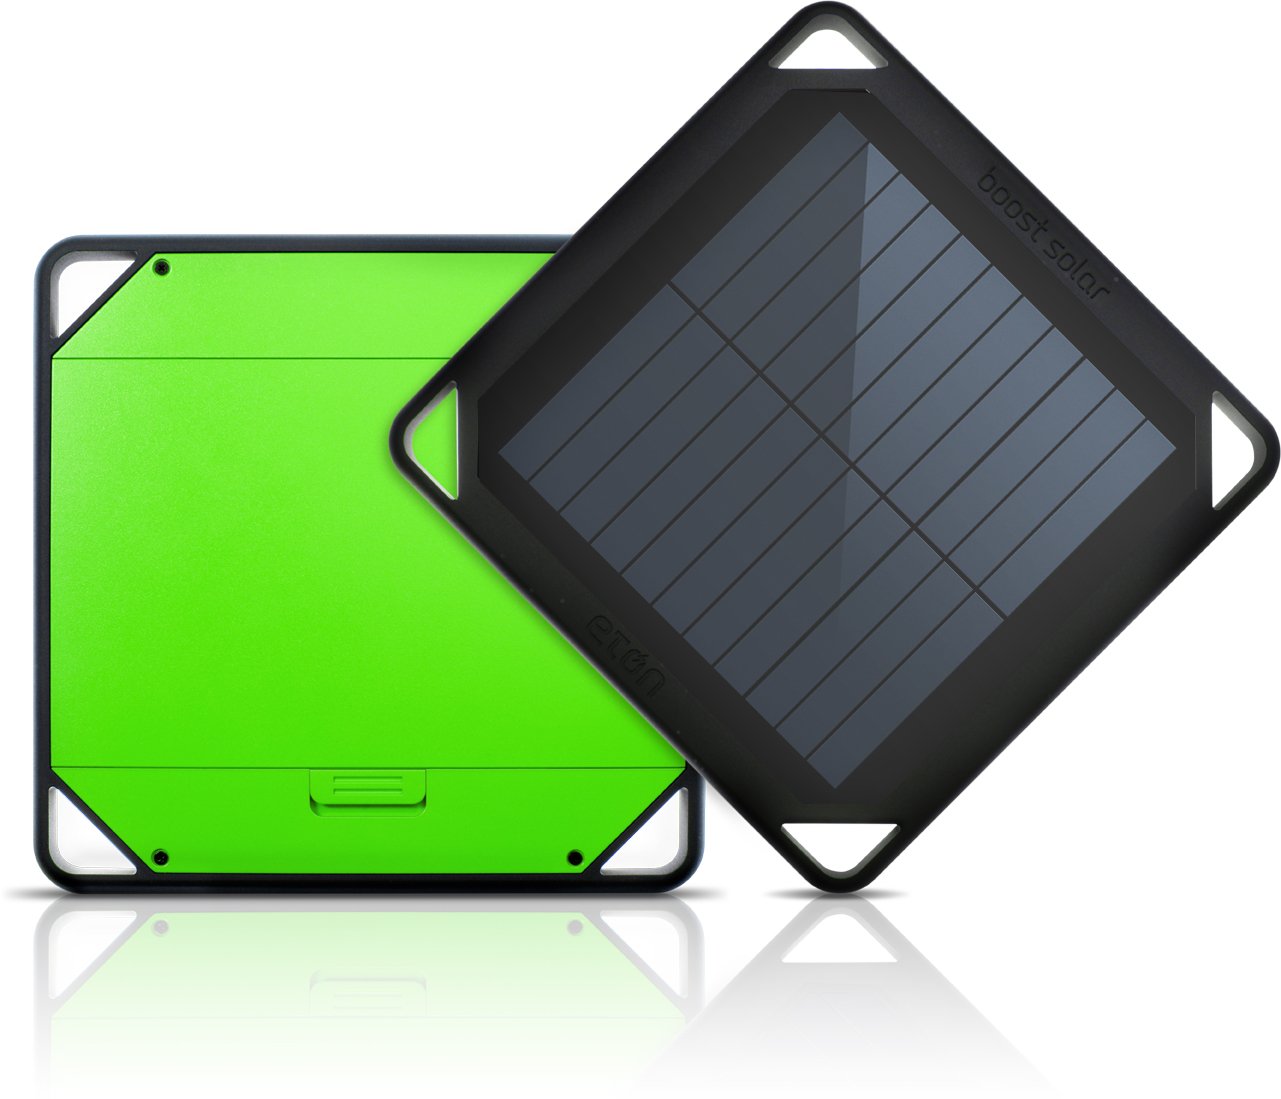 The Eton BoostSolar is a solar charger with a 5,000 mAh battery.